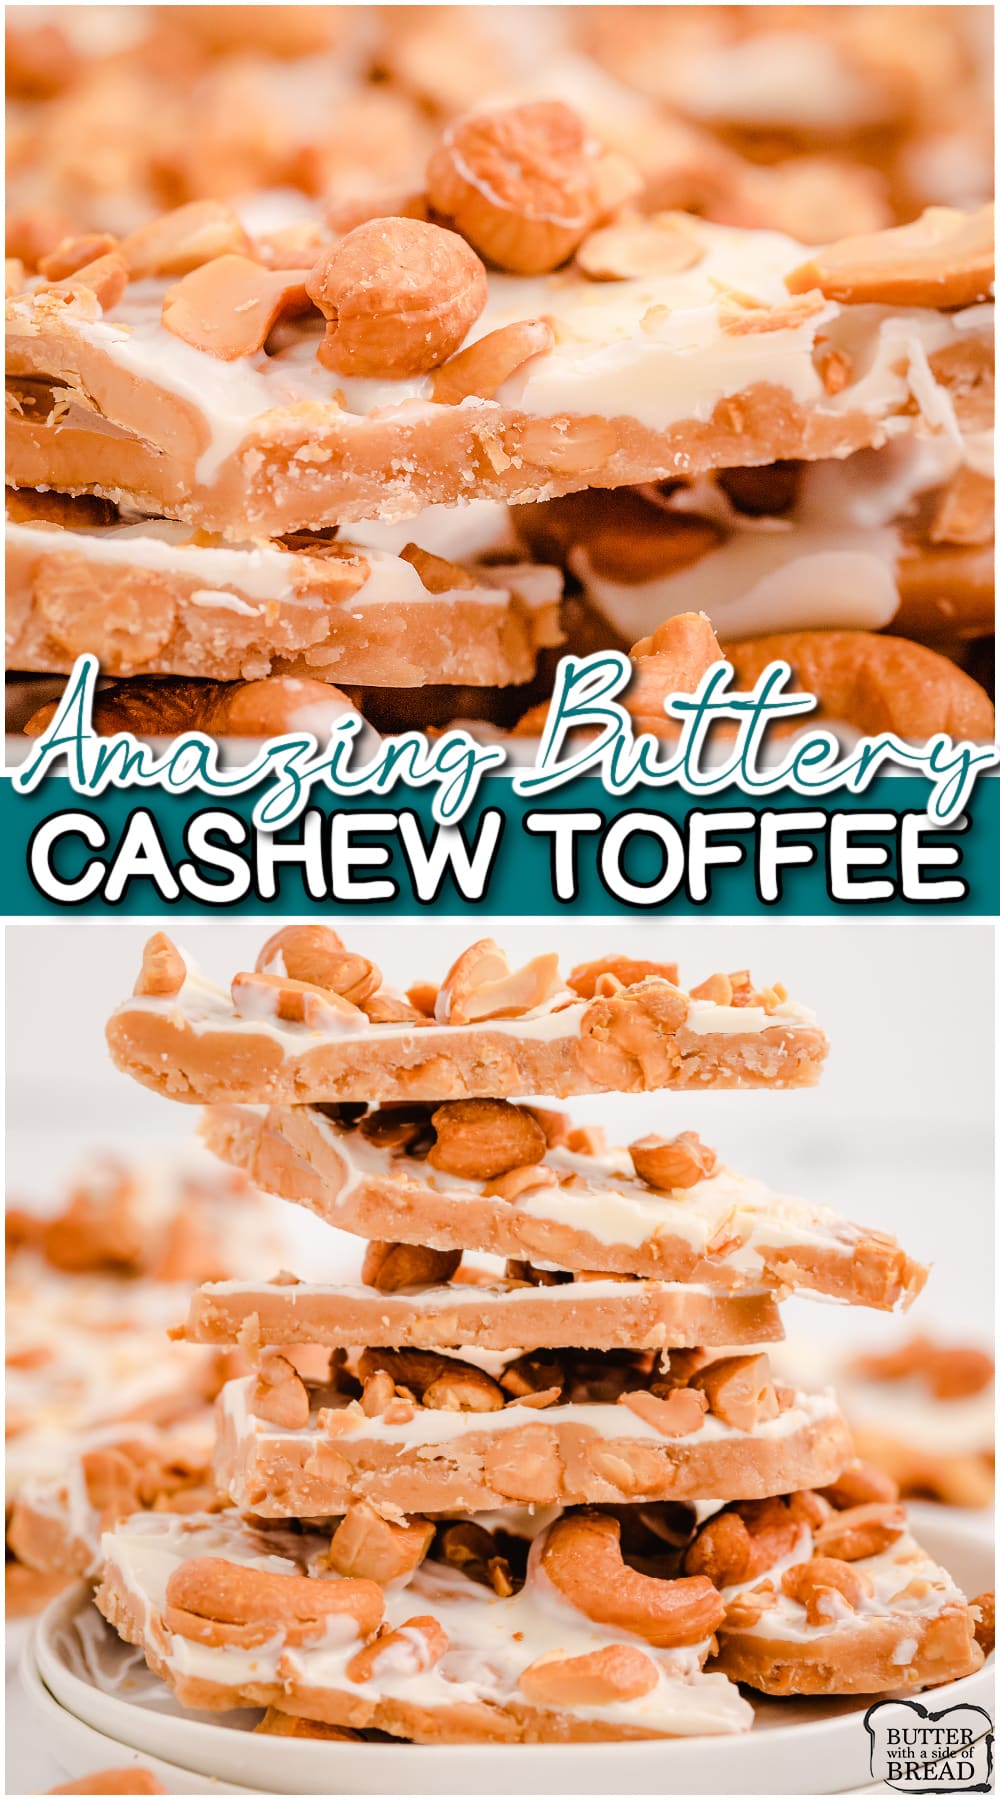 I make a double batch of this Cashew Toffee every single year for the past 15+ years! Buttery rich toffee that's tender with fantastic flavor from roasted cashews. Tips included for making the BEST toffee!